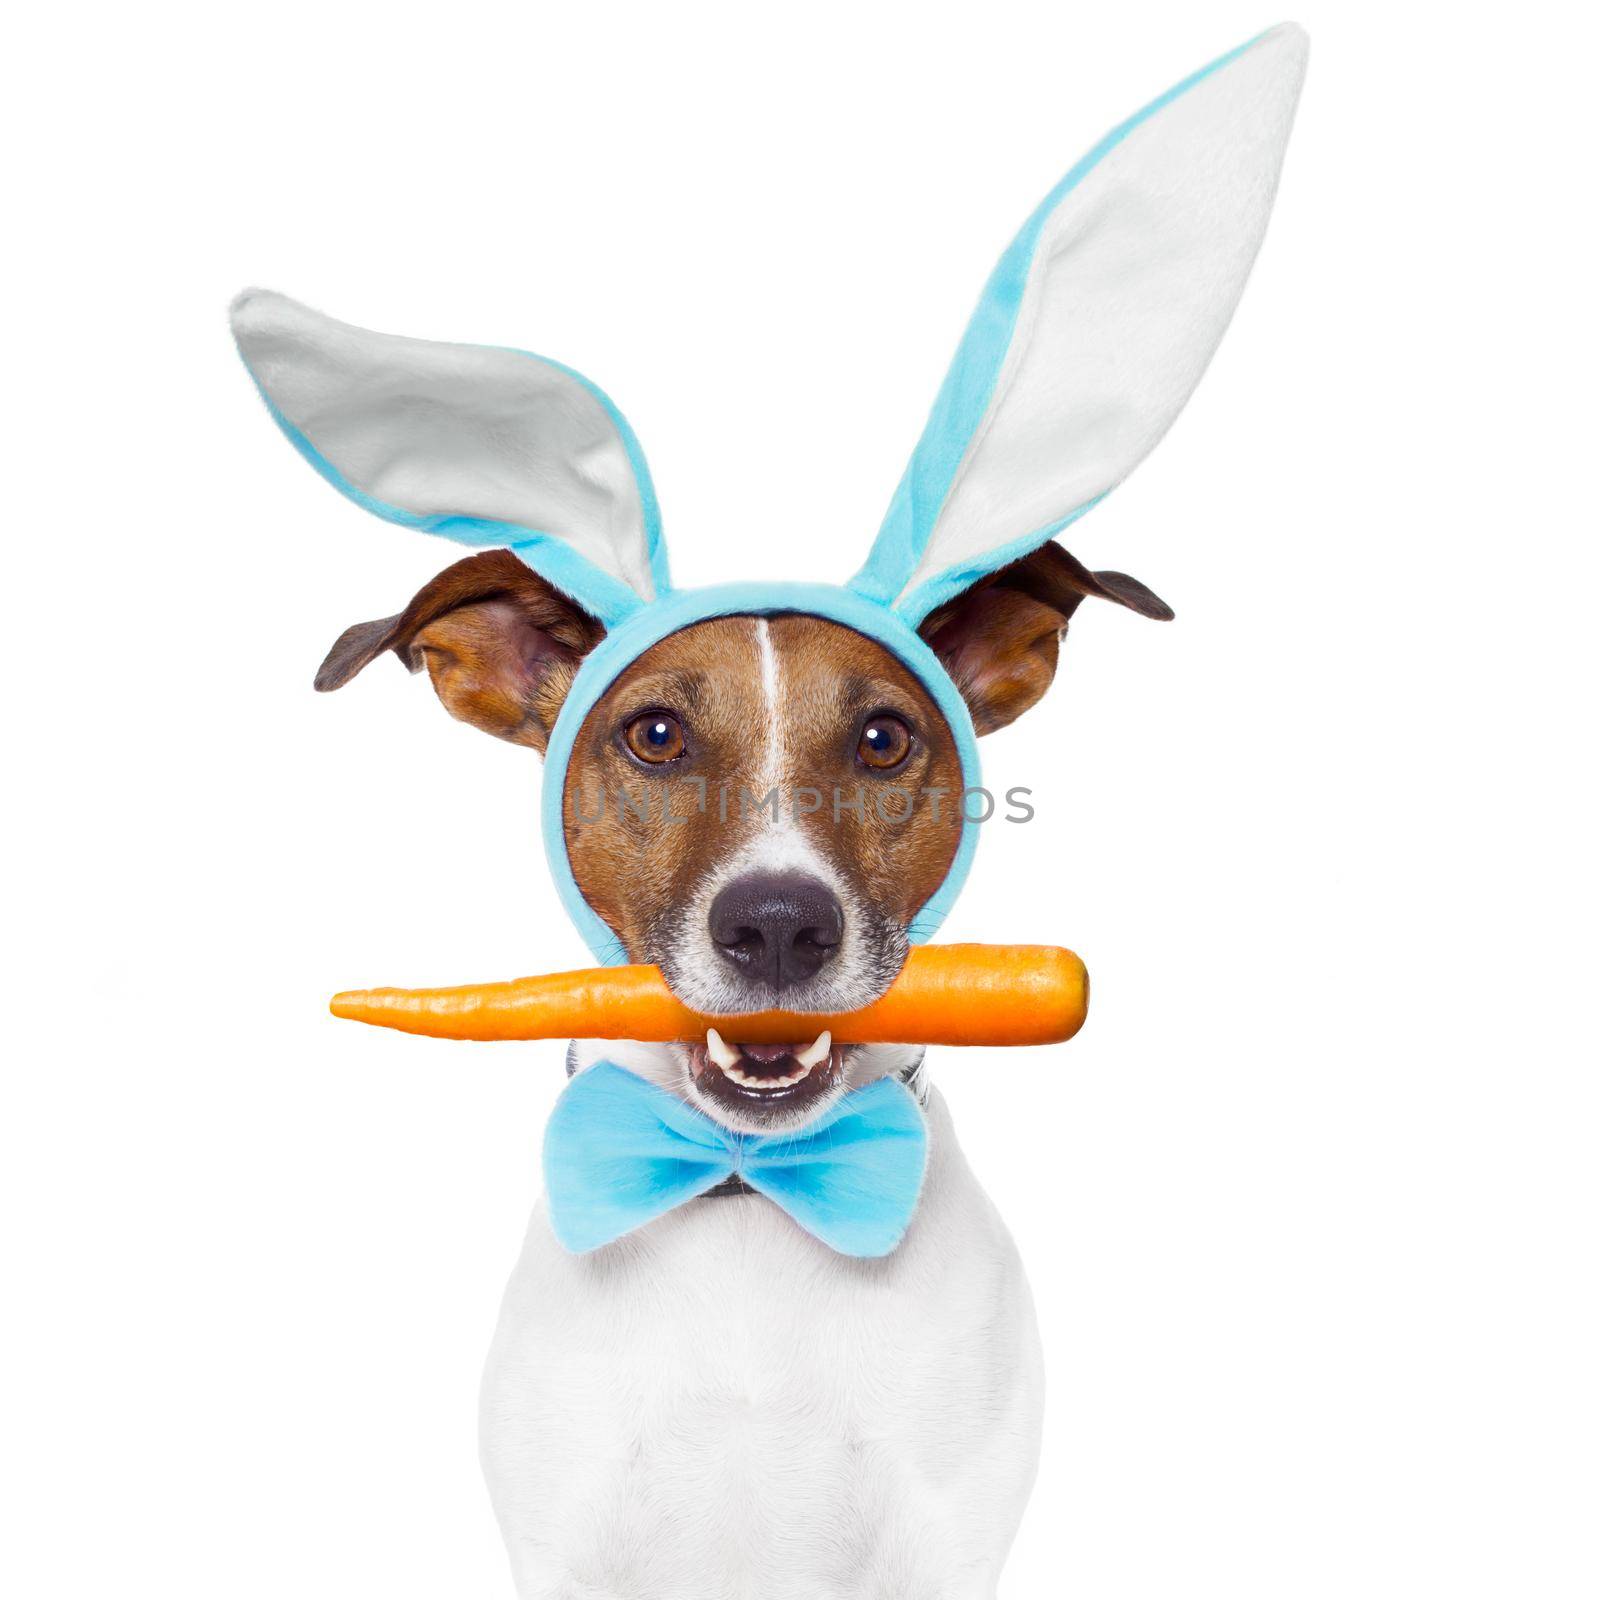 dog with bunny ears and a carrot by Brosch